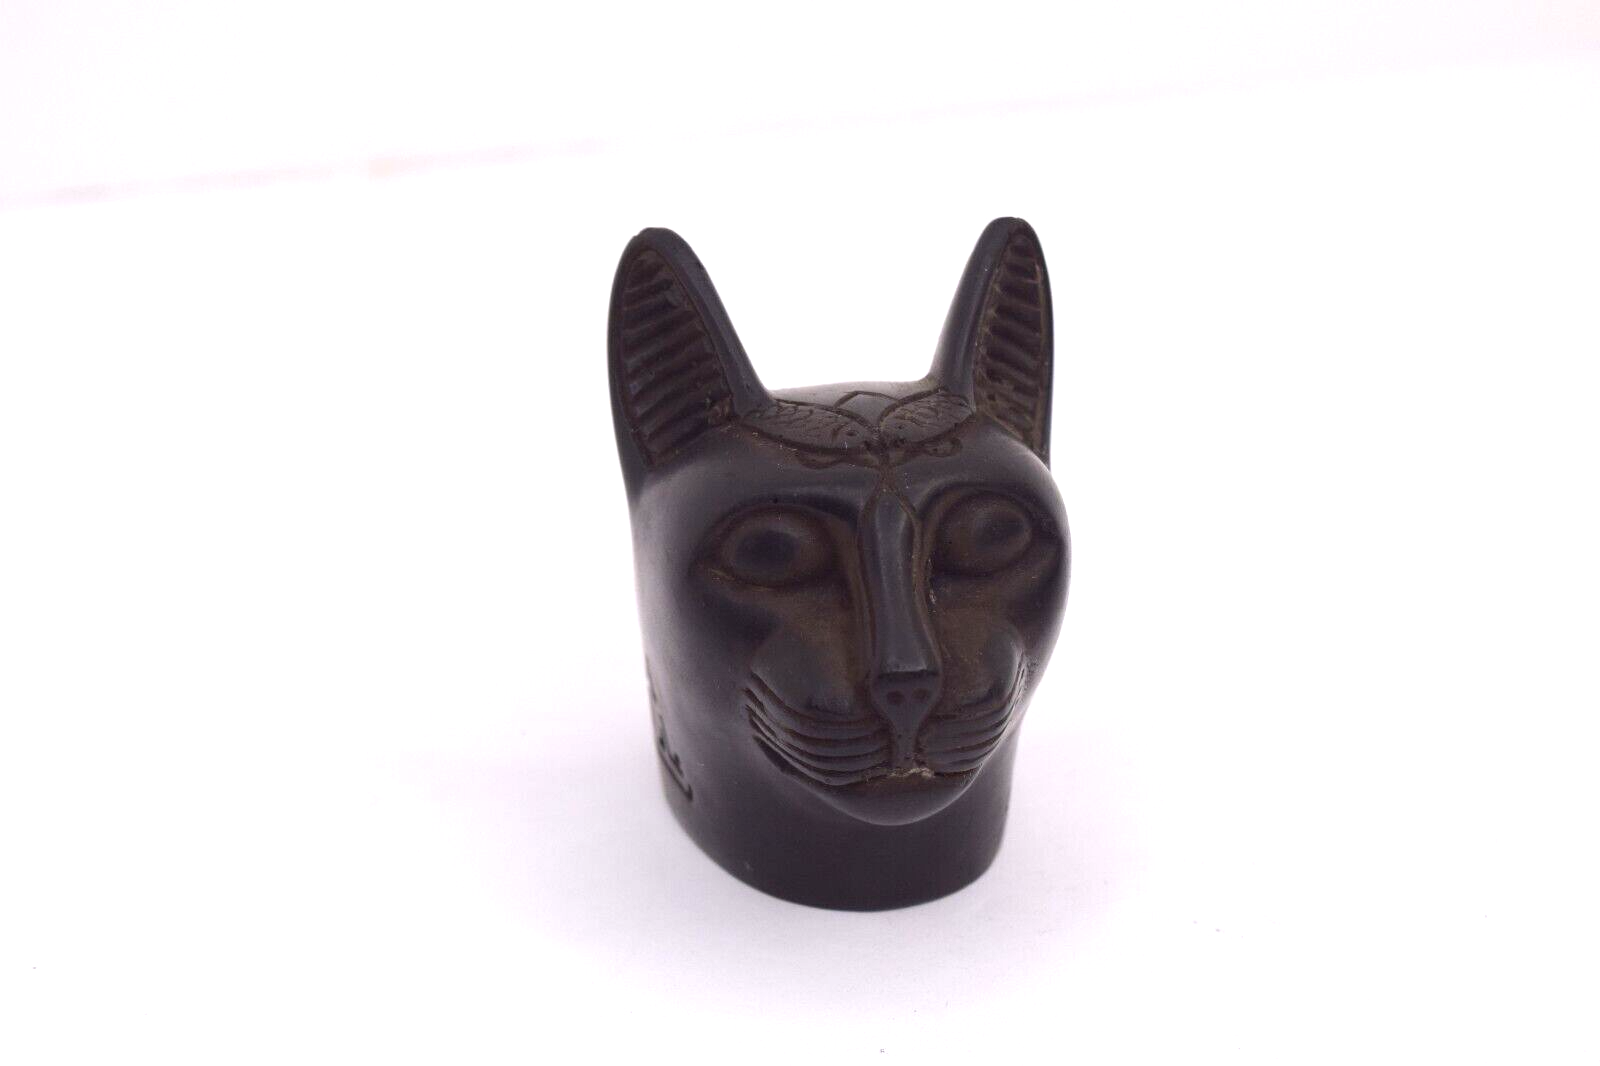 Primary image for Carved Black Stone Egyptian Bastet Cat Head Figurine